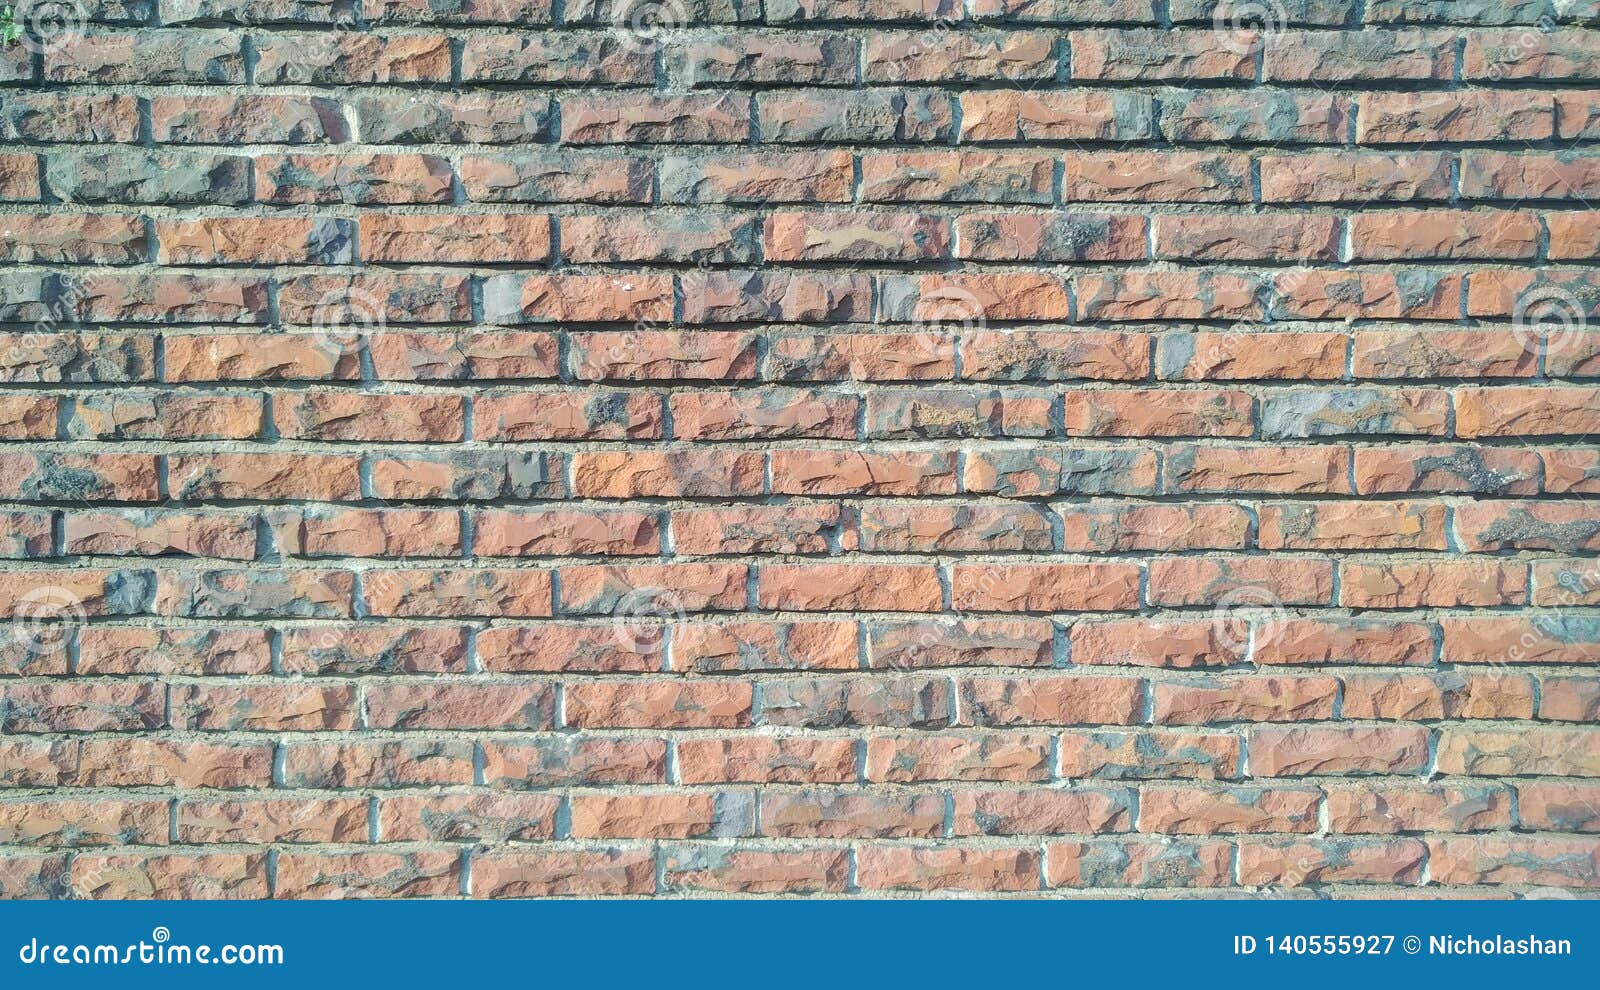 Weathered Stained Old Brick Wall Background Stock Image ...